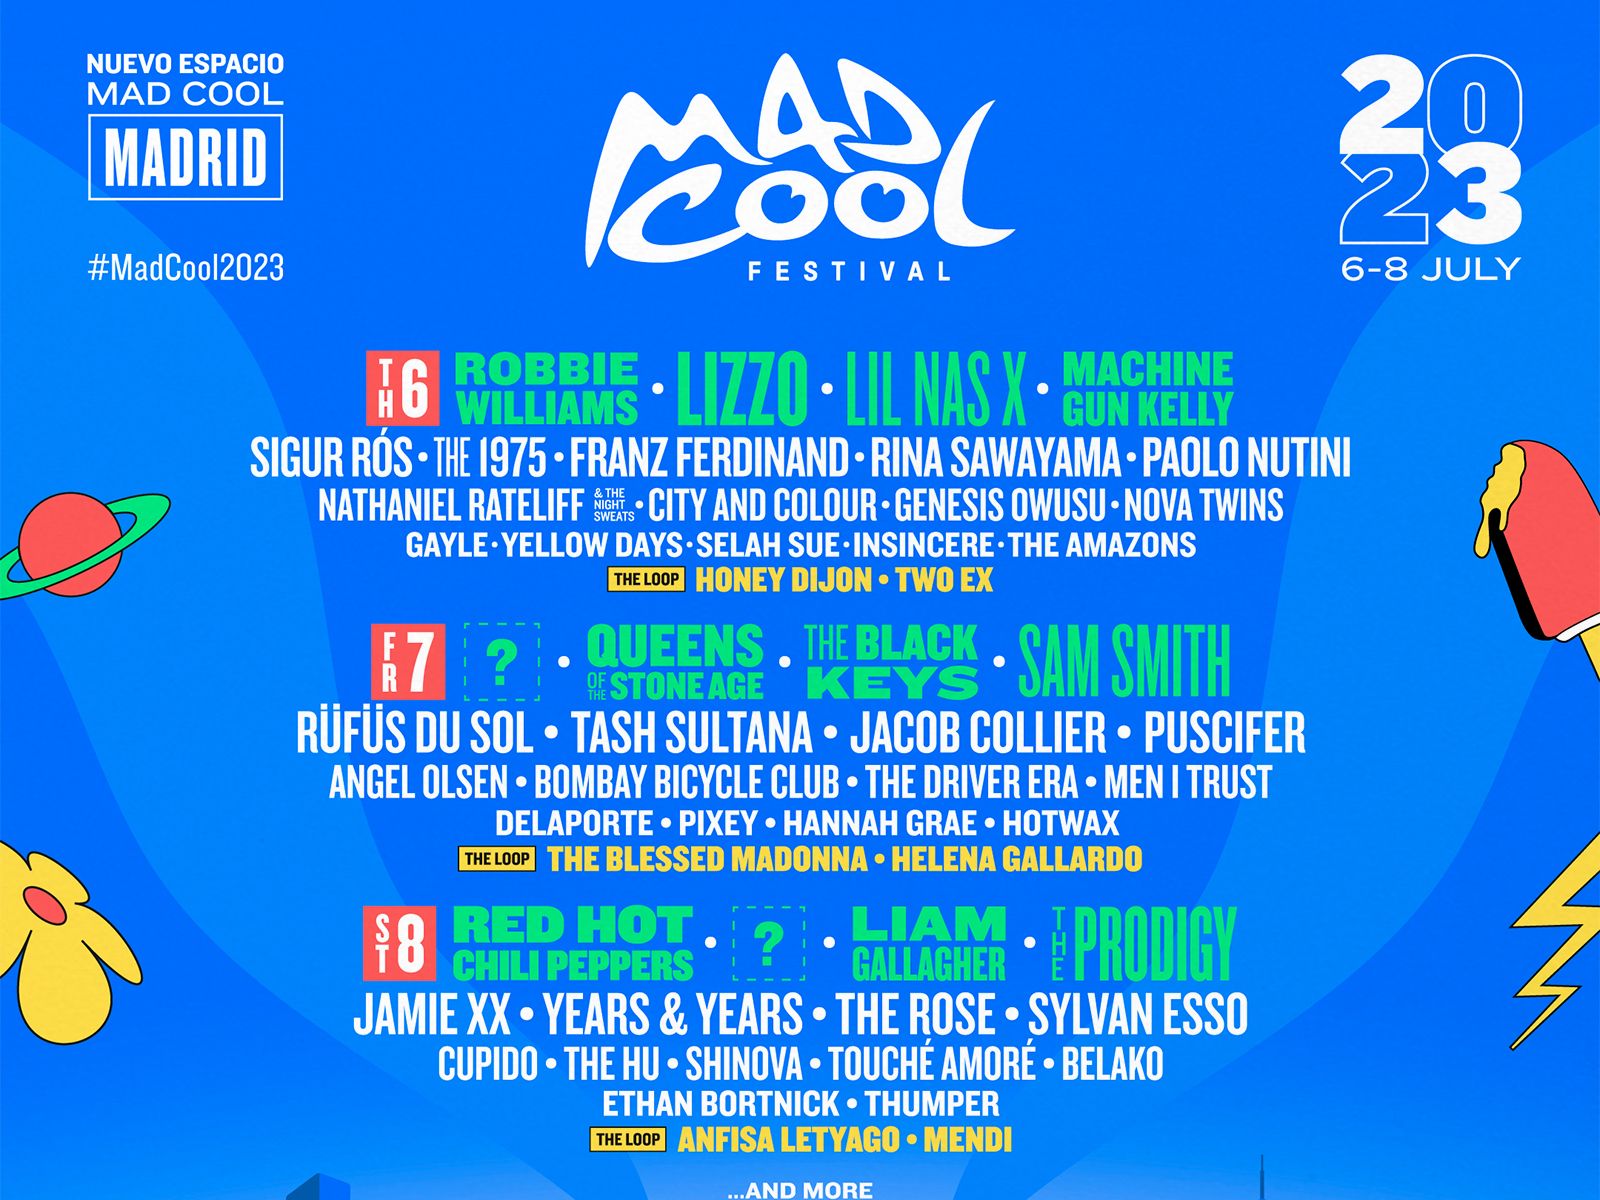 Mad Cool confirms first artists for its 2023 edition